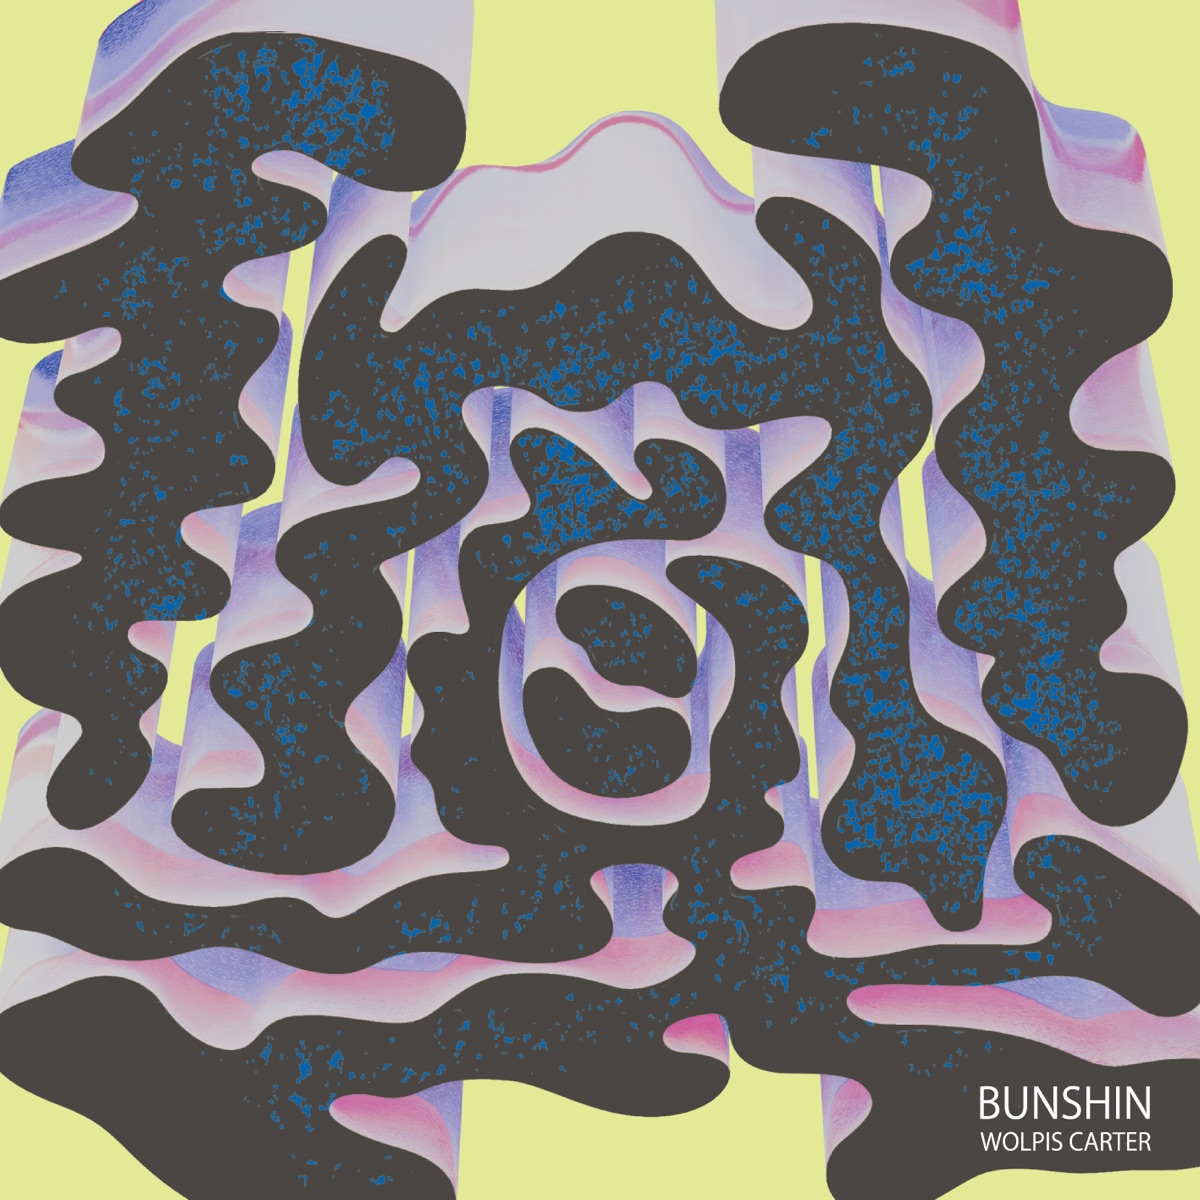 Cover art for『Wolpis Carter - Shoudou』from the release『Bunshin』